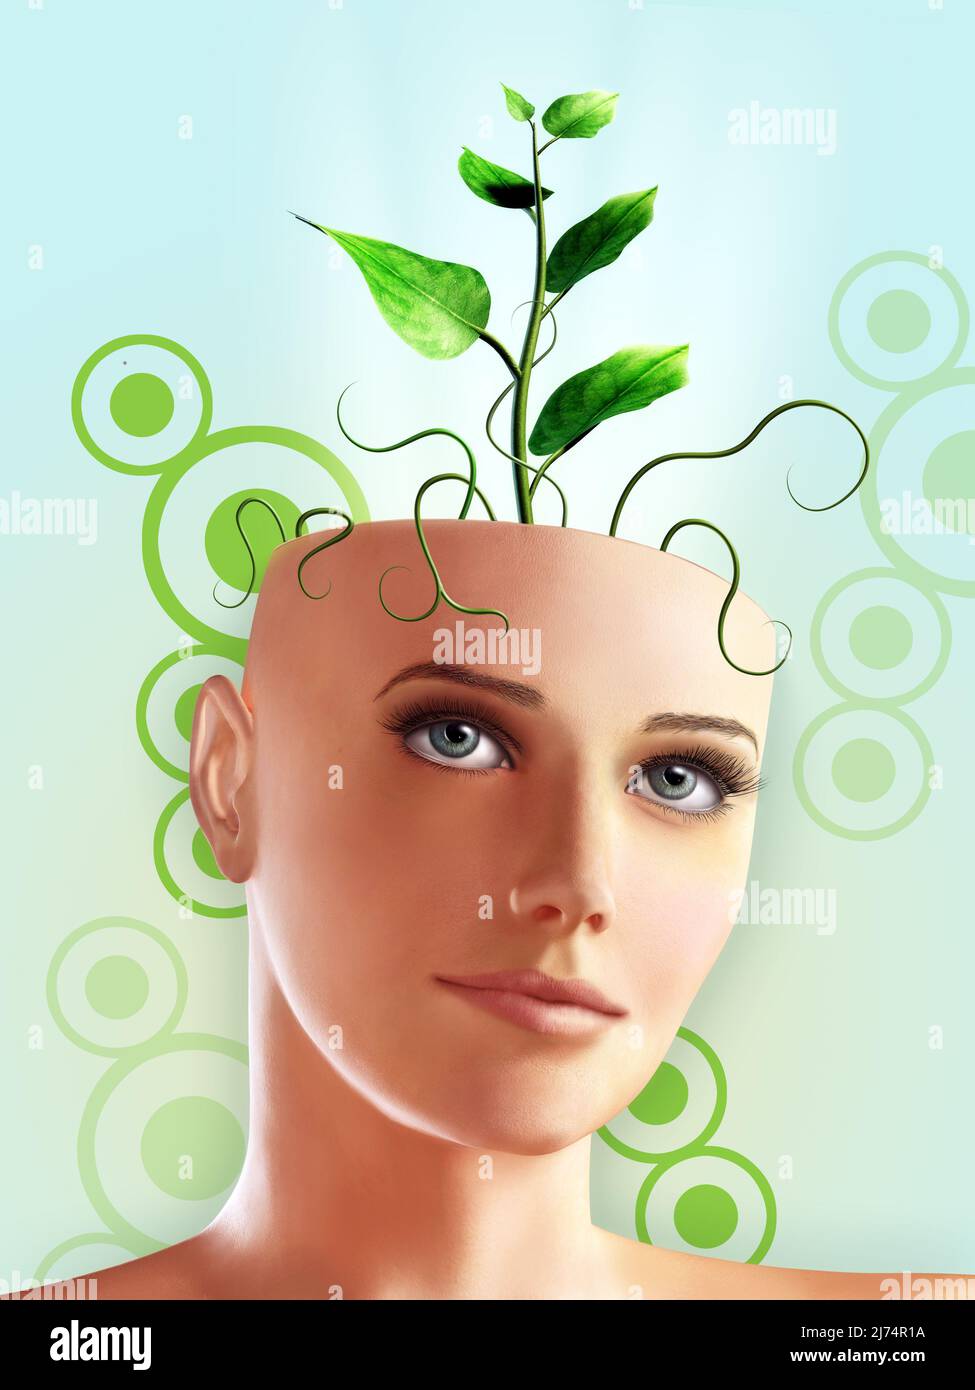 A new plant growing out of a woman's head. 3d render of the female head, no model release necessary. Digital illustration. Stock Photo